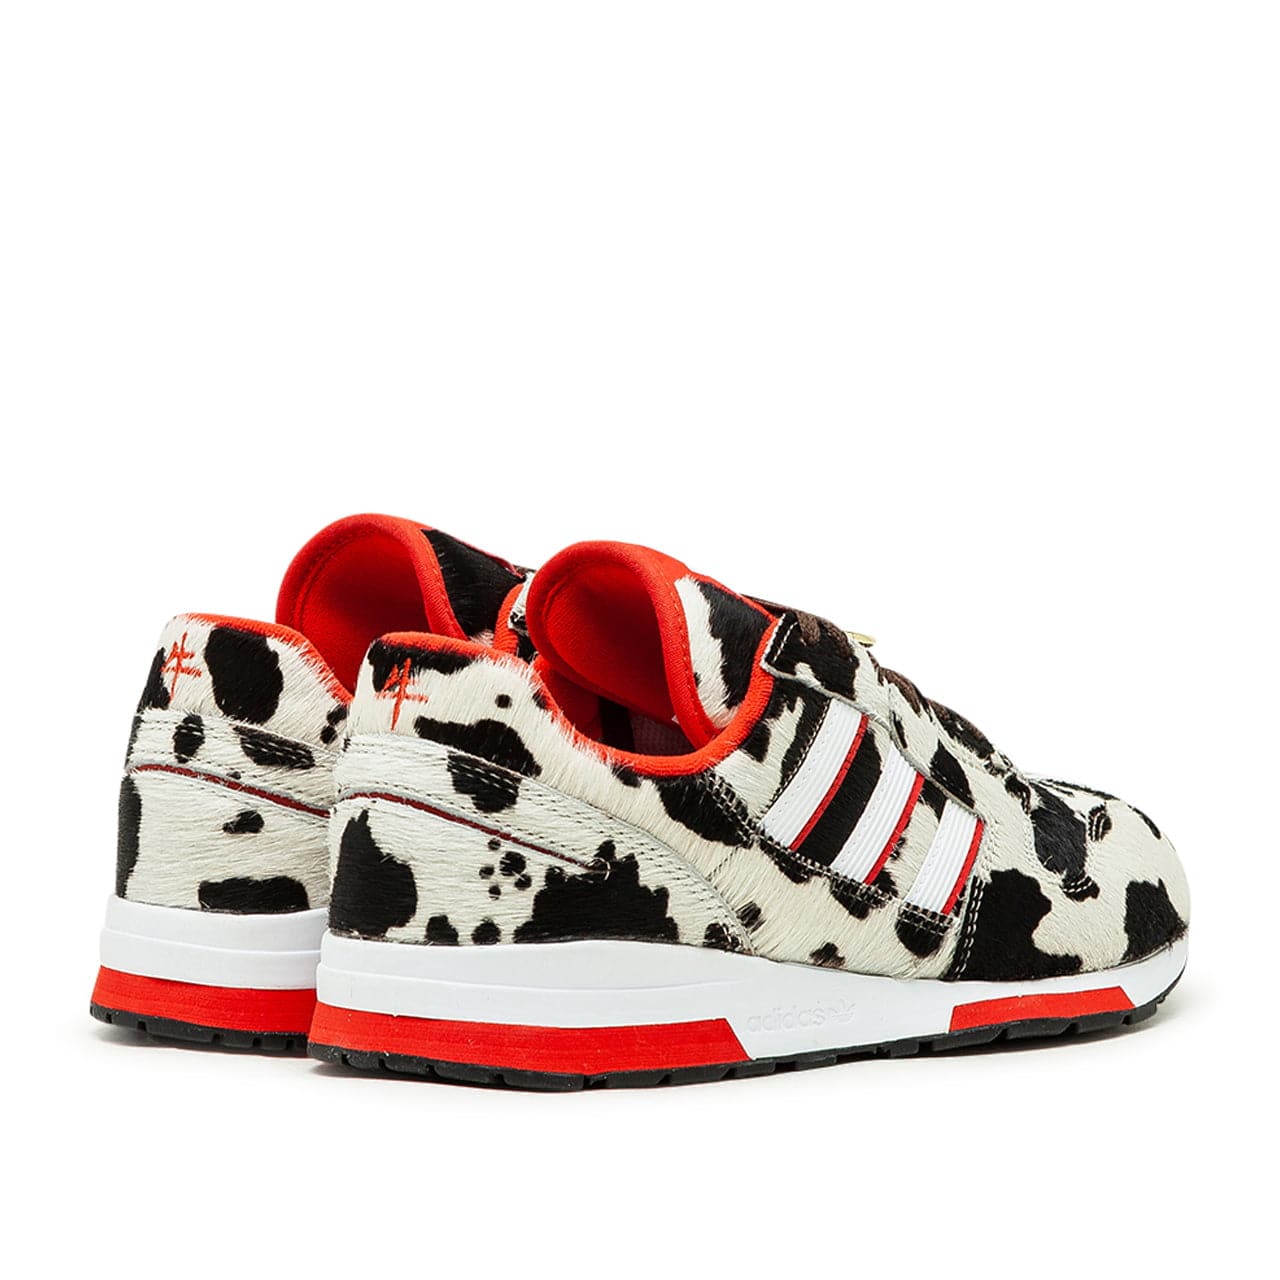 adidas ZX 420 'Year of the Ox' (White / Black / Red) FY3662 